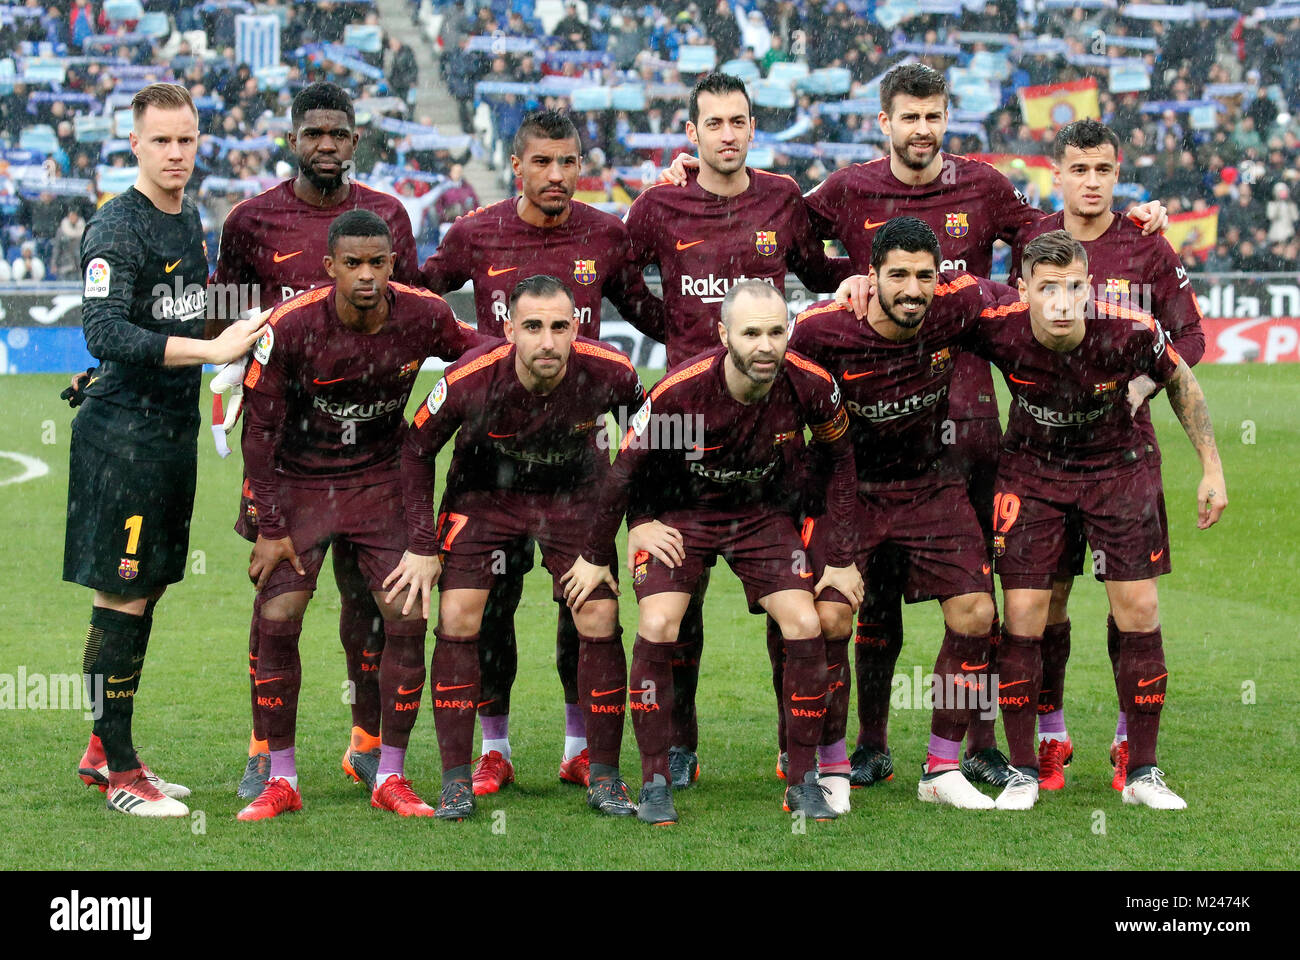 Barcelona, Spain. 01st Feb, 2018. FC Barcelona team during the match between RCD Espanyol vs FC Barcelona, for the round 22 of the Liga Santander, played at Cornella -El Prat Stadium on 3th February 2018 in Barcelona, Spain. Credit: Gtres Información más Comuniación on line, S.L./Alamy Live News Stock Photo